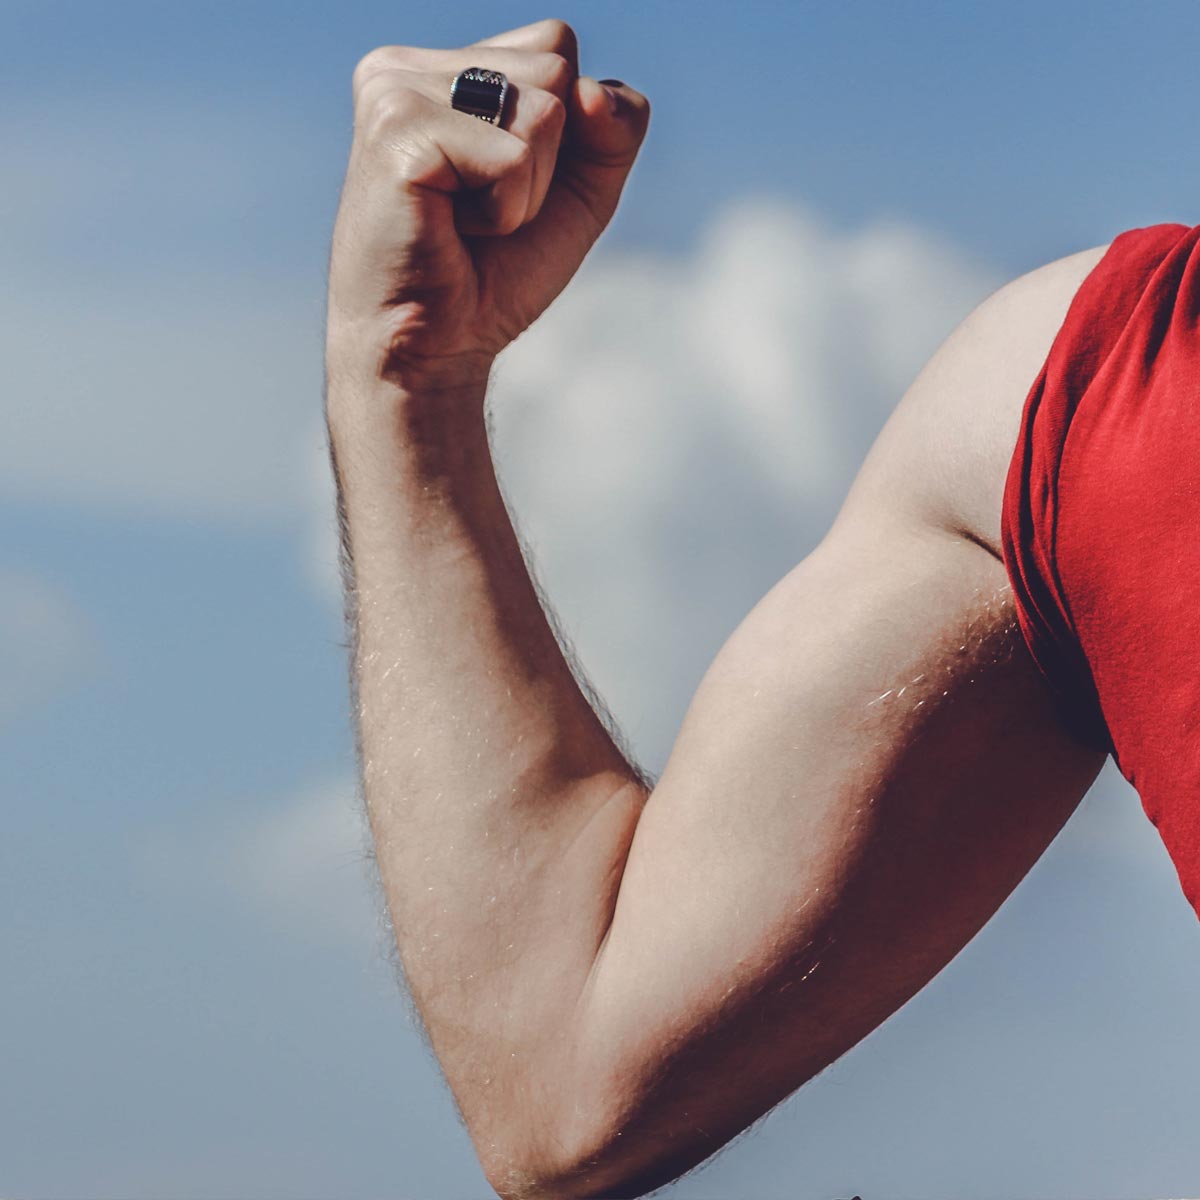 A man in a red t-shirt flexes the muscles on his right arm